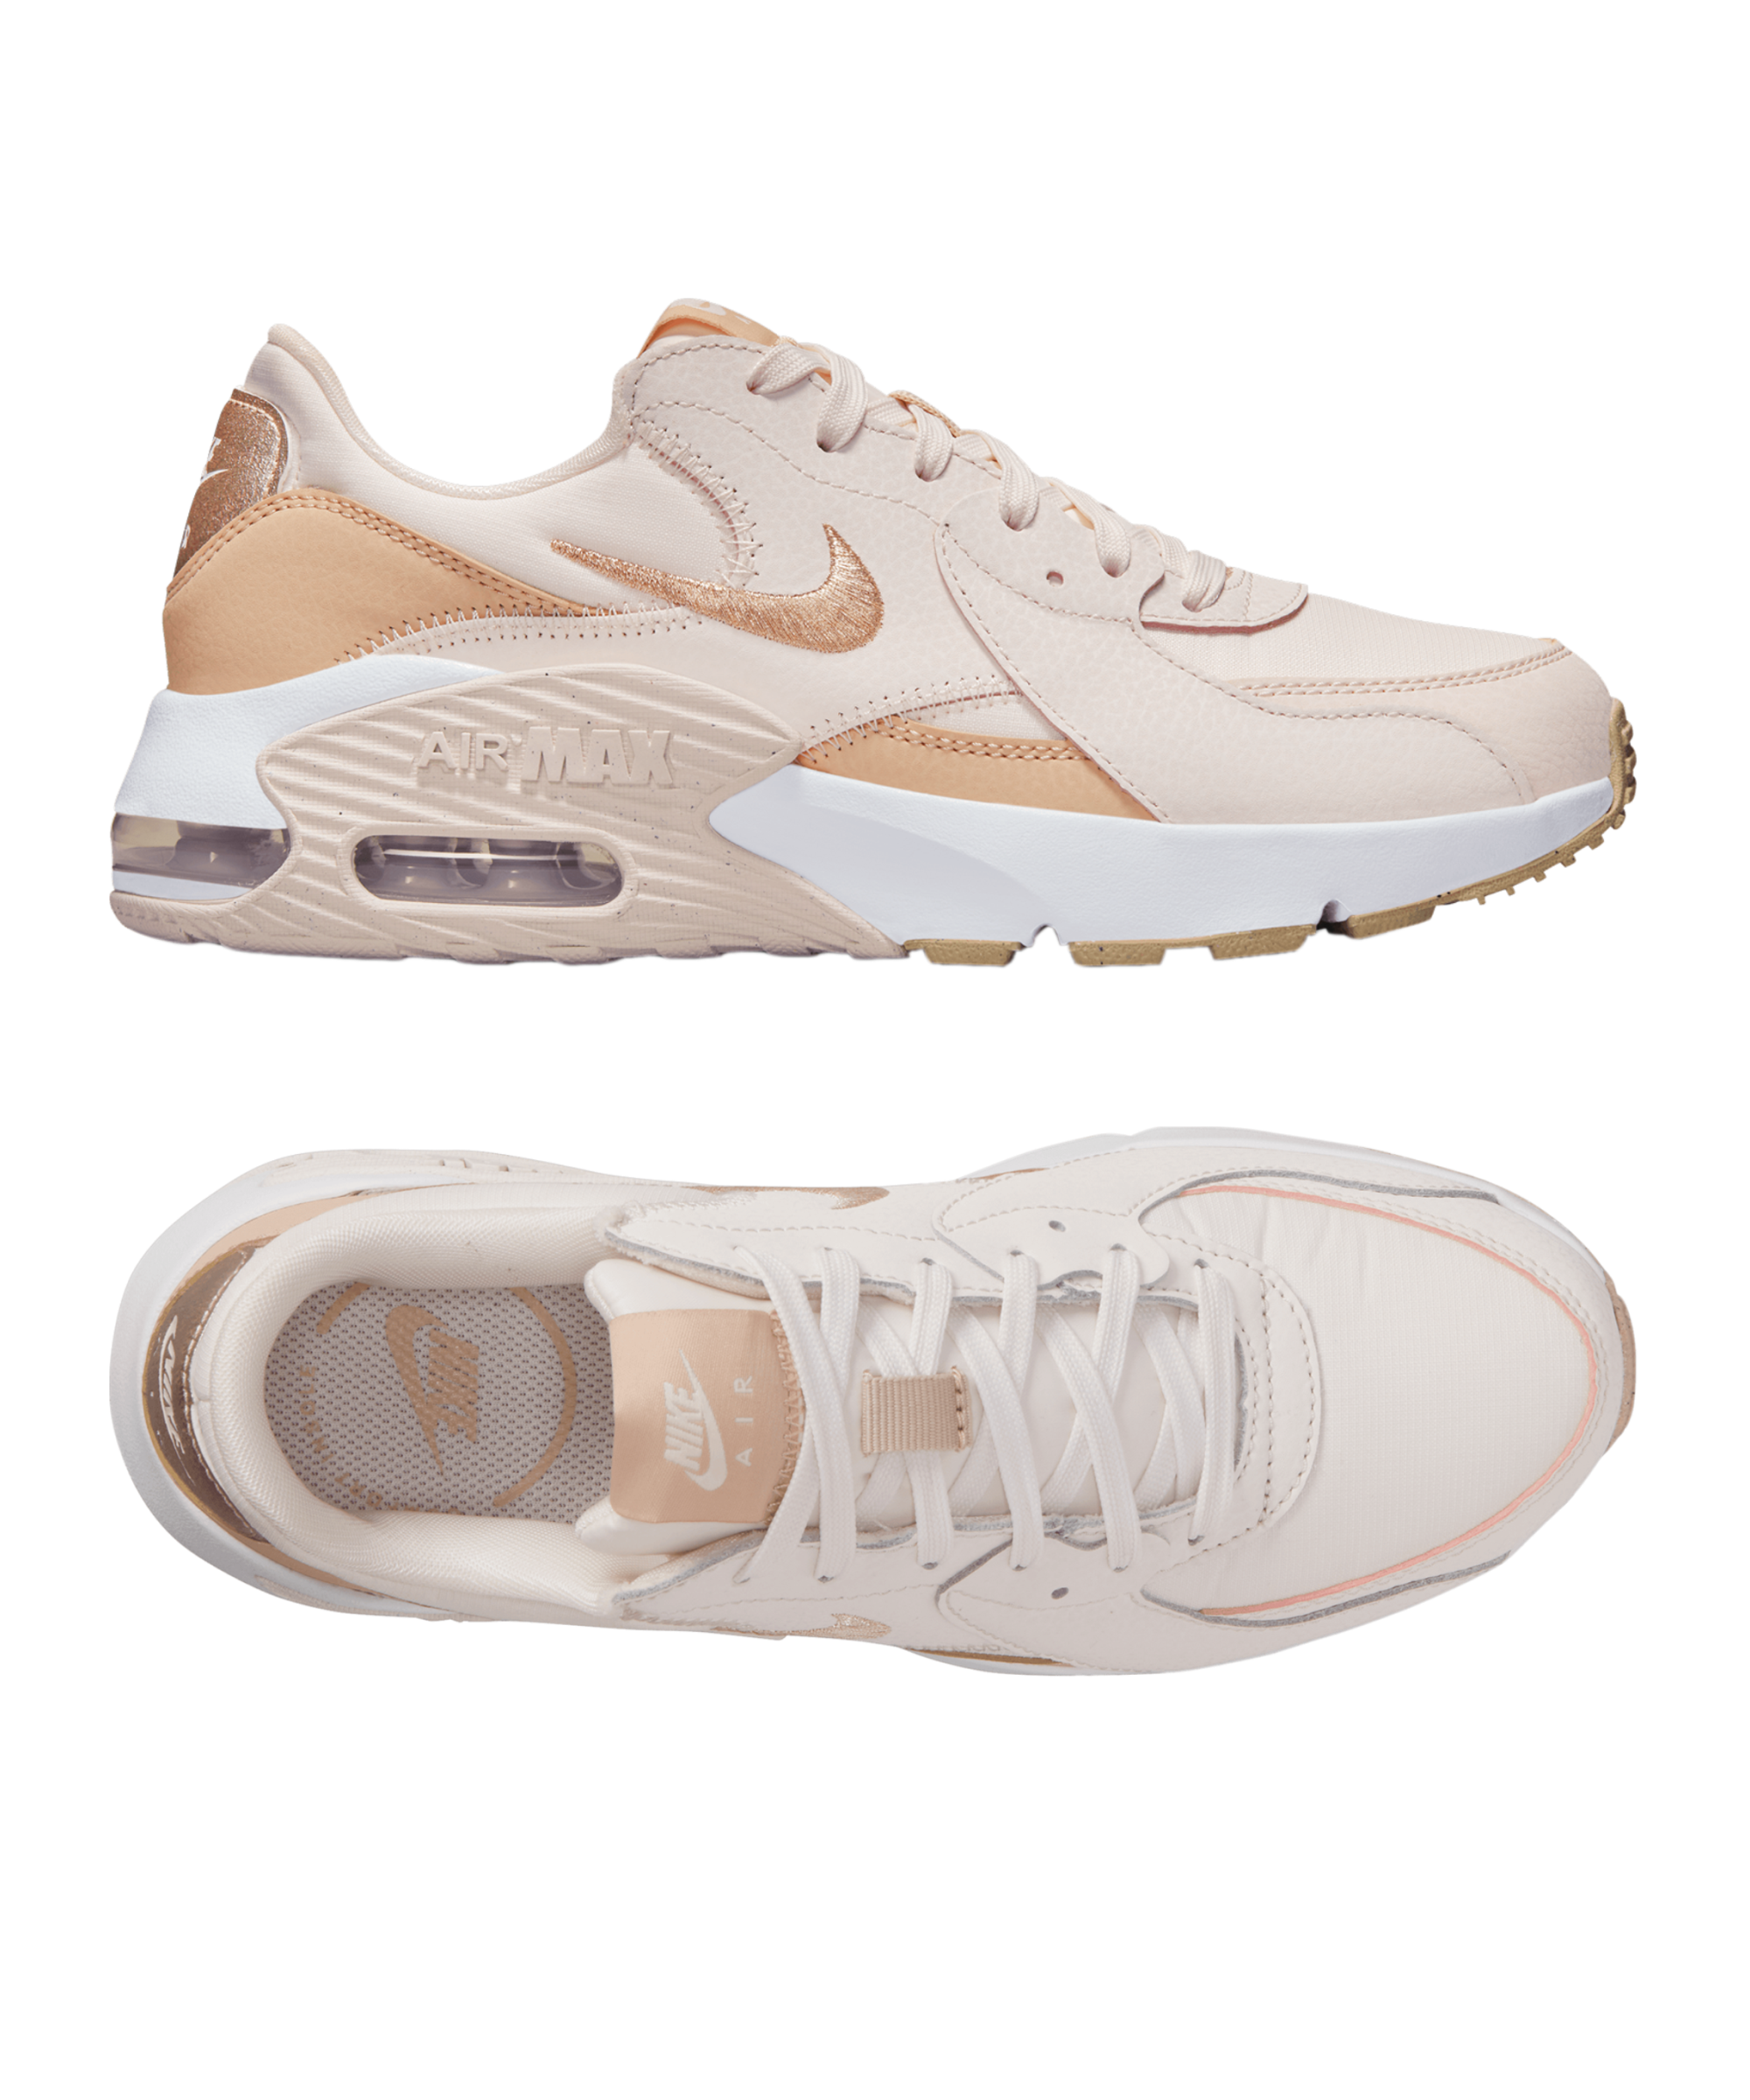 Nike Air Max Excee Women - light pink